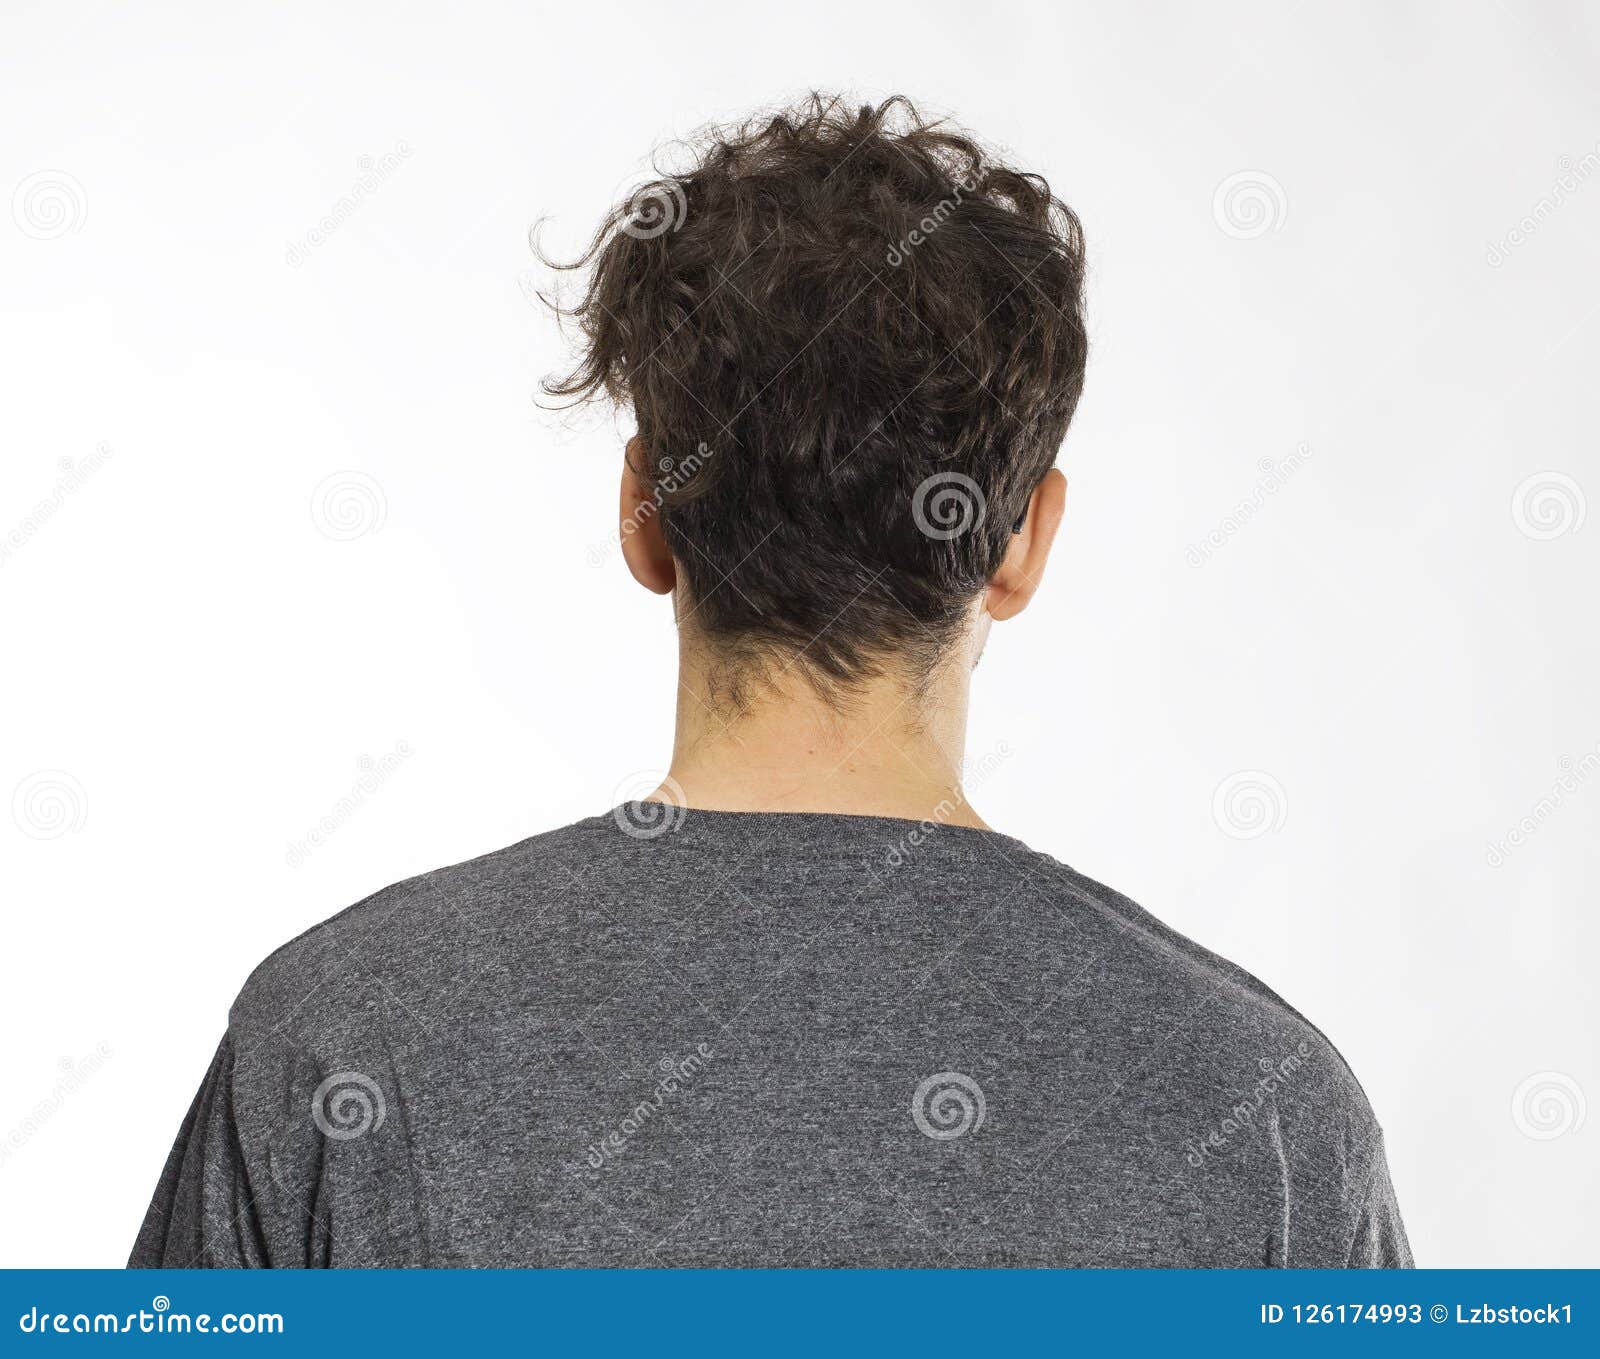 Back View of Young Man with Curly Hair Stock Image - Image of people,  sparse: 126174993